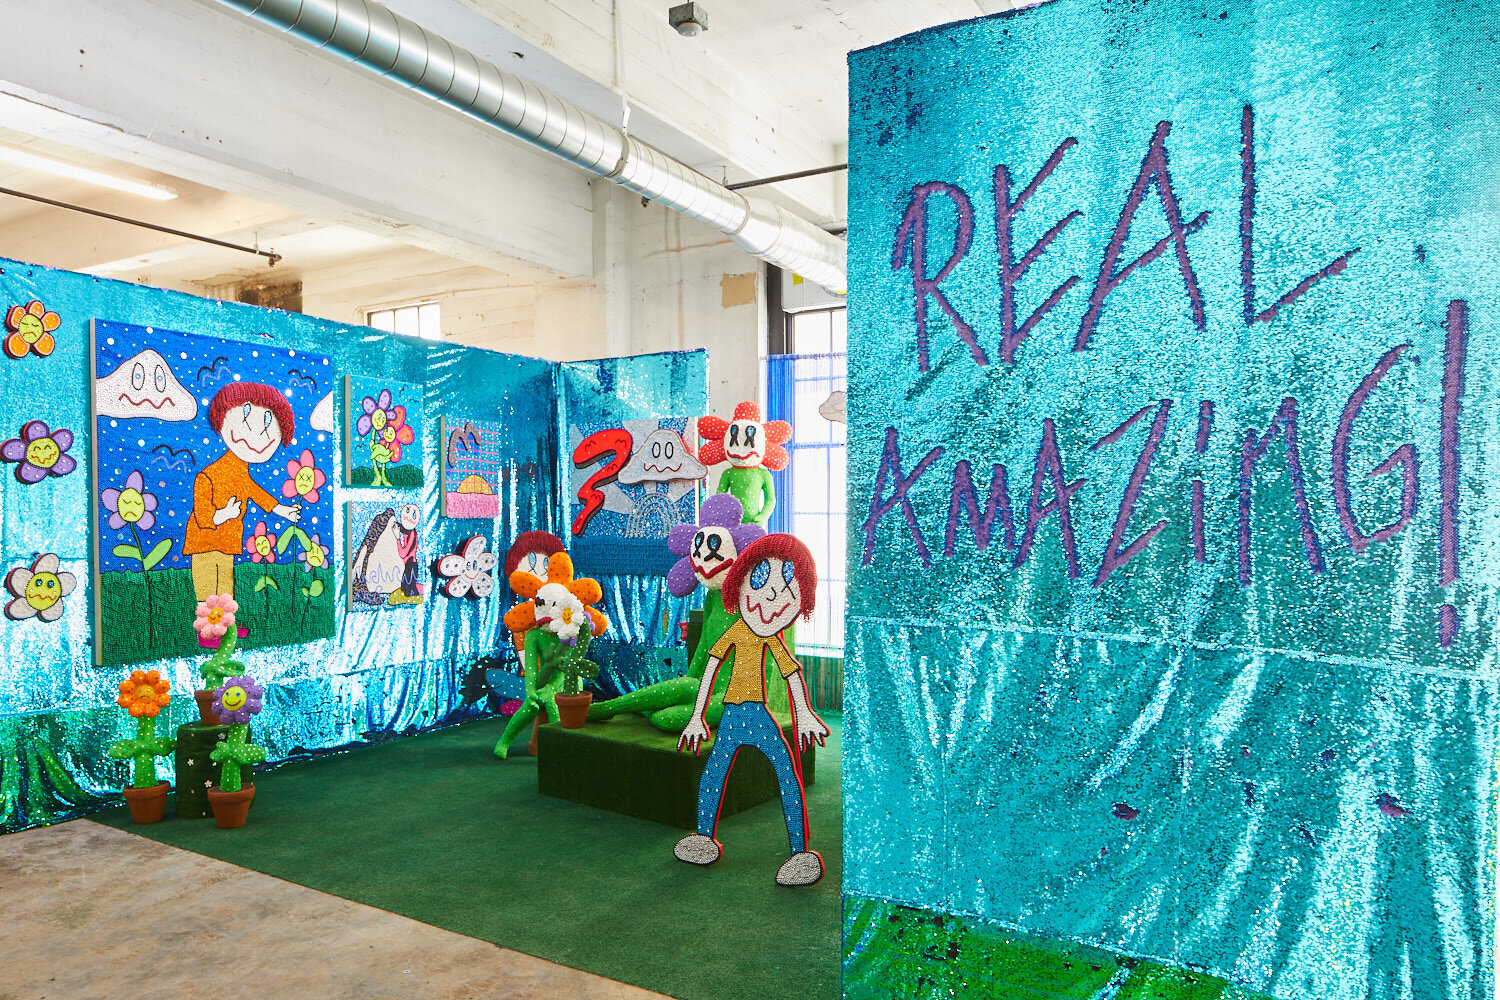 'Real Amazing!' by Benjamin Cabral curated by Lauren Powell - image (c) SPRING/BREAK Art Show 2020"Image by Samuel Morgan Photography"&nbsp;